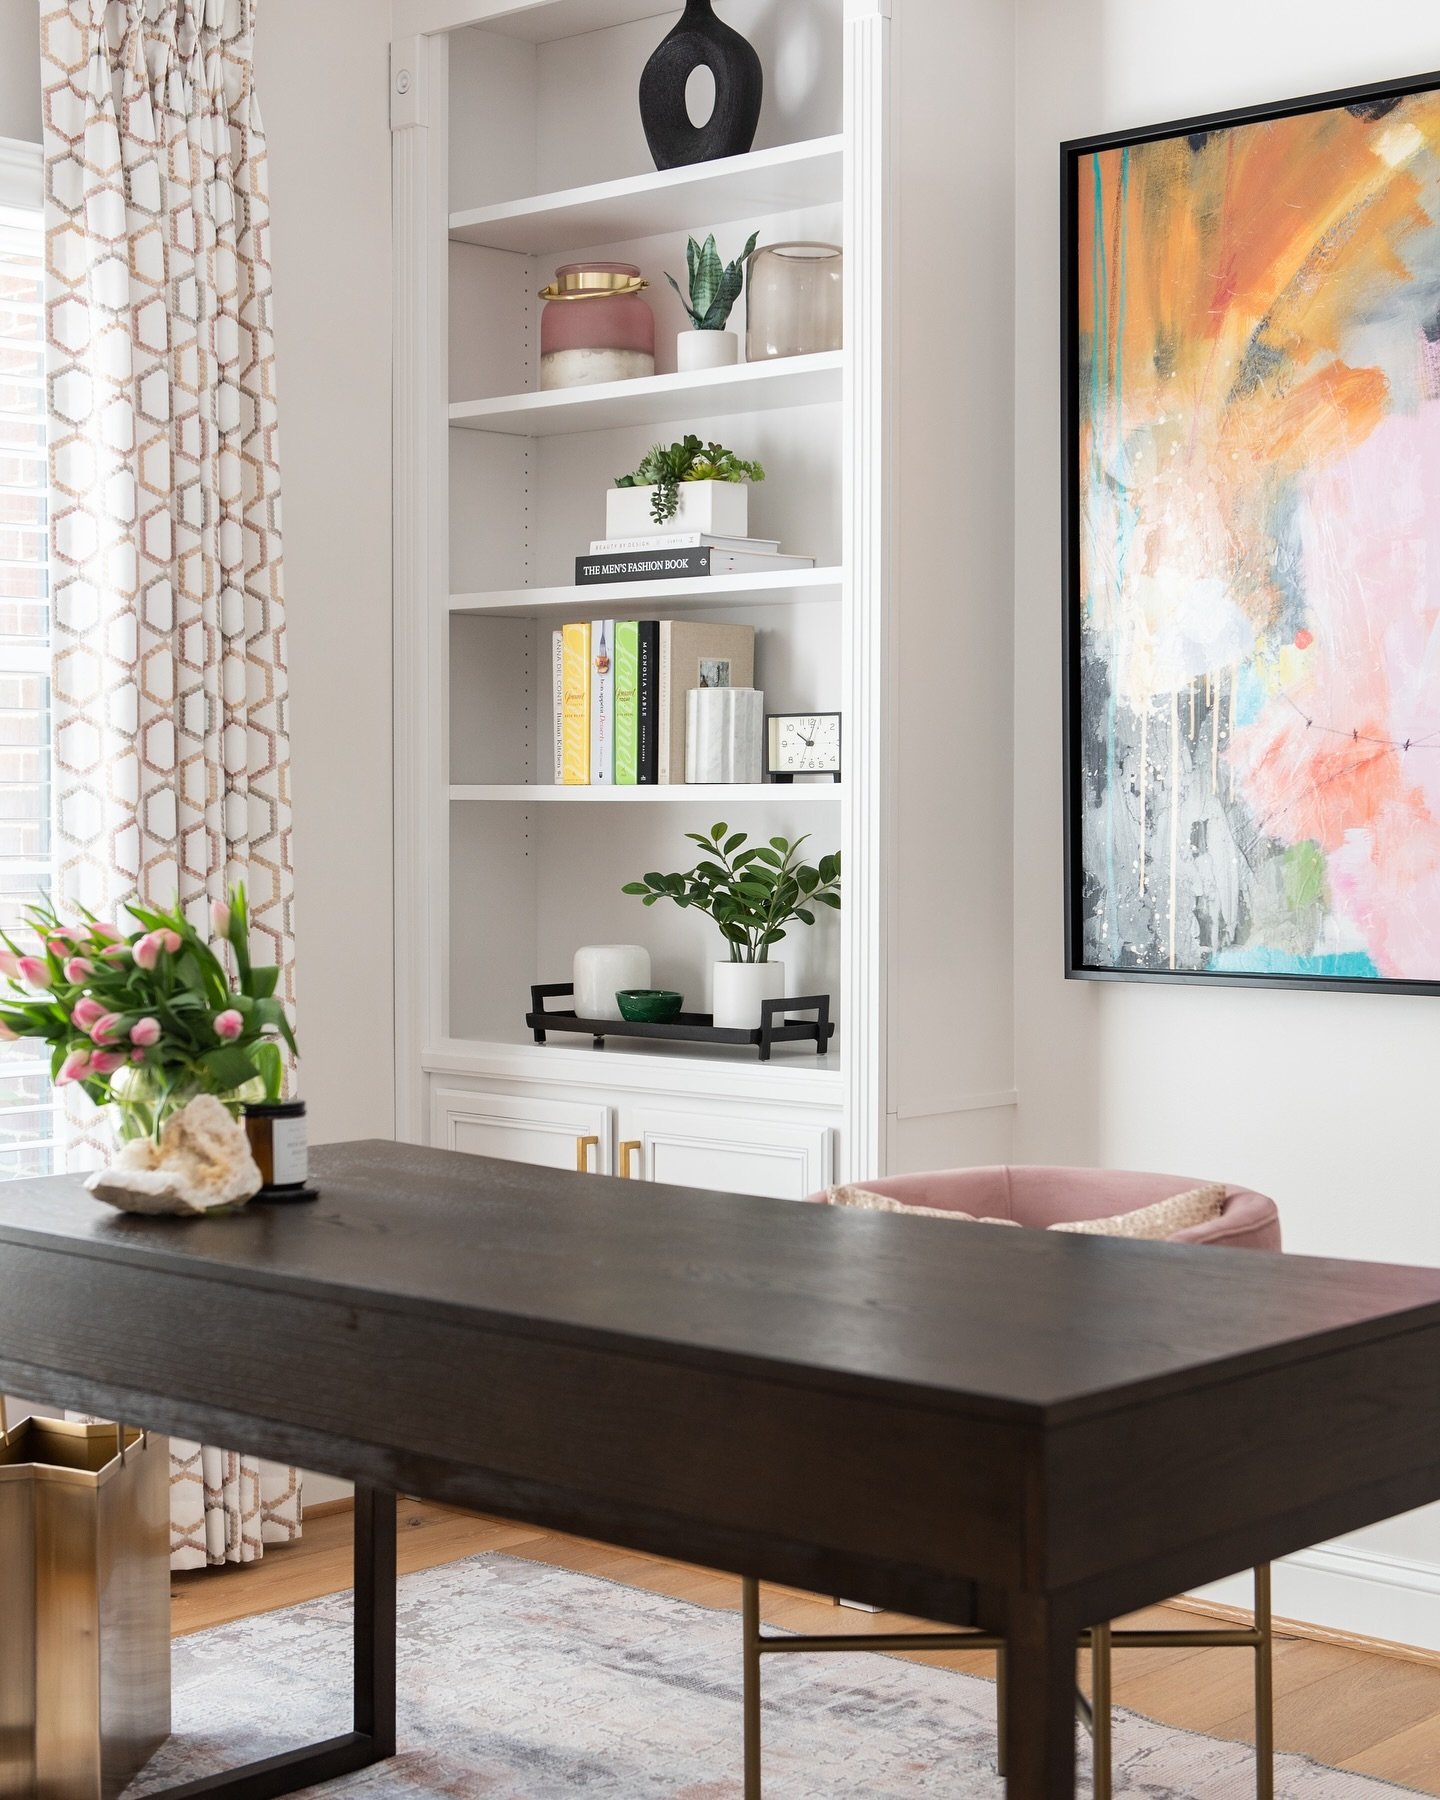 Here&rsquo;s to reaching that point in life where you score the ultimate boss babe office &ndash; chic, inspiring, and totally rad.  Oh, and with a little pink!

#homeofficetransformation #feminineworkspace #officeinspiration #homeofficeideas #bossba